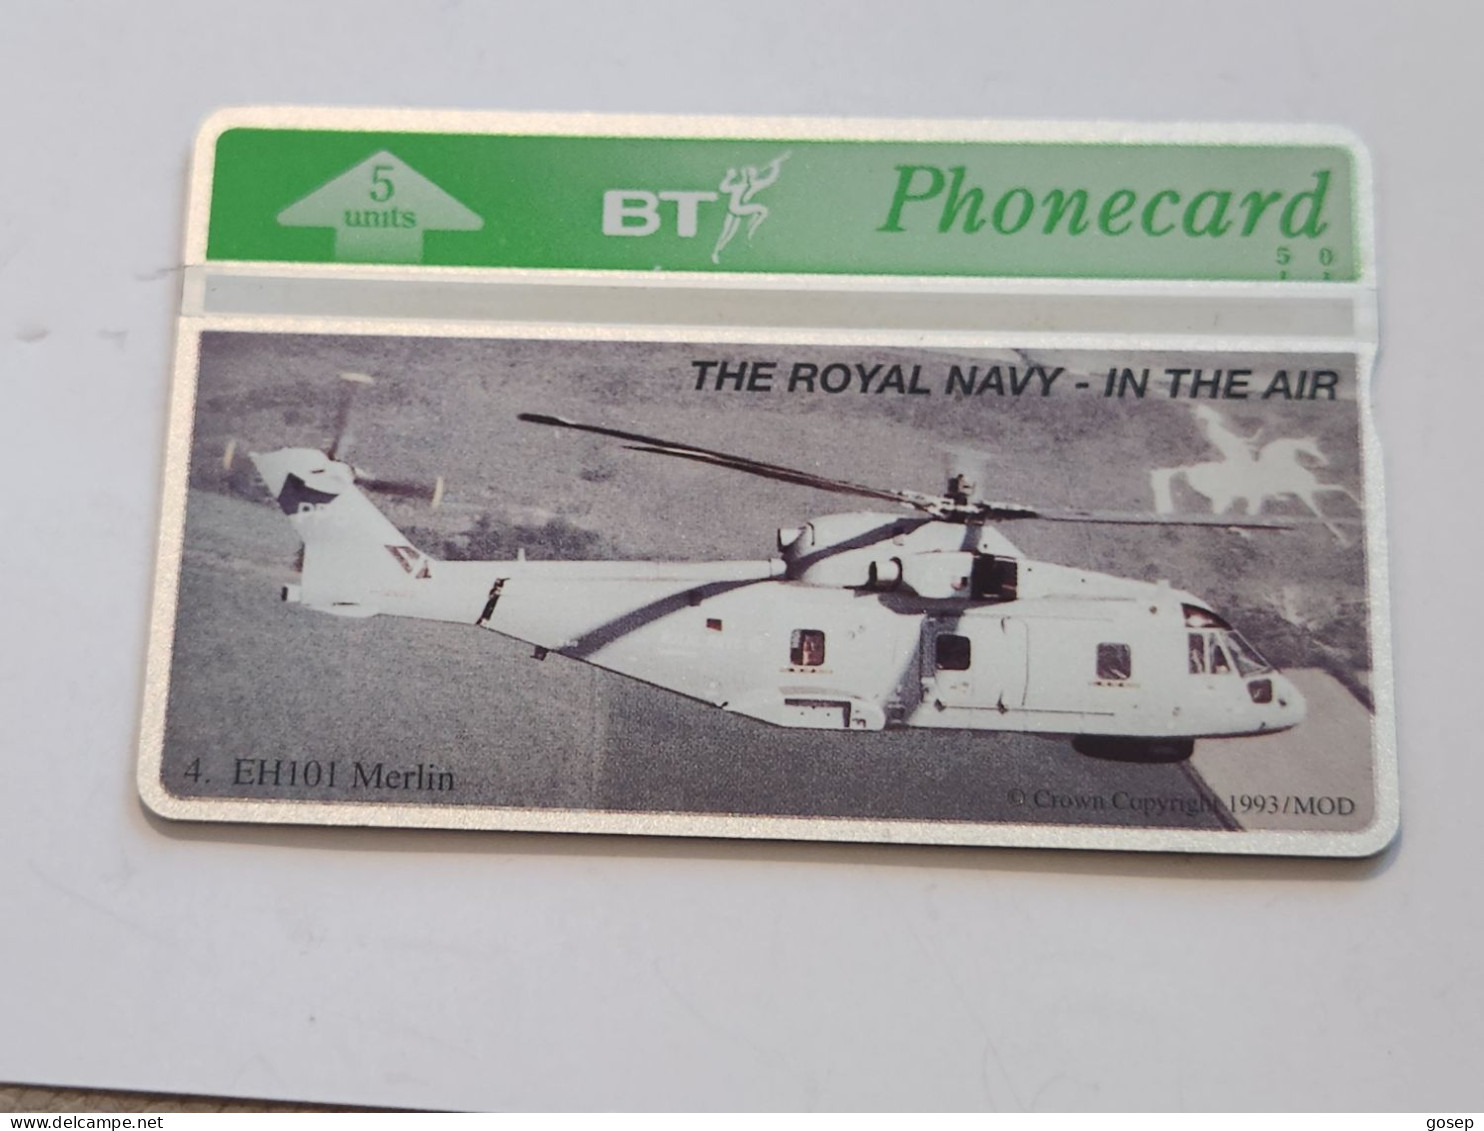 United Kingdom-(BTG-373)-Royal Navy In Air-(4)-(326)(5units)(428L01862)(tirage-600)-price Cataloge--8.00£-mint - BT General Issues